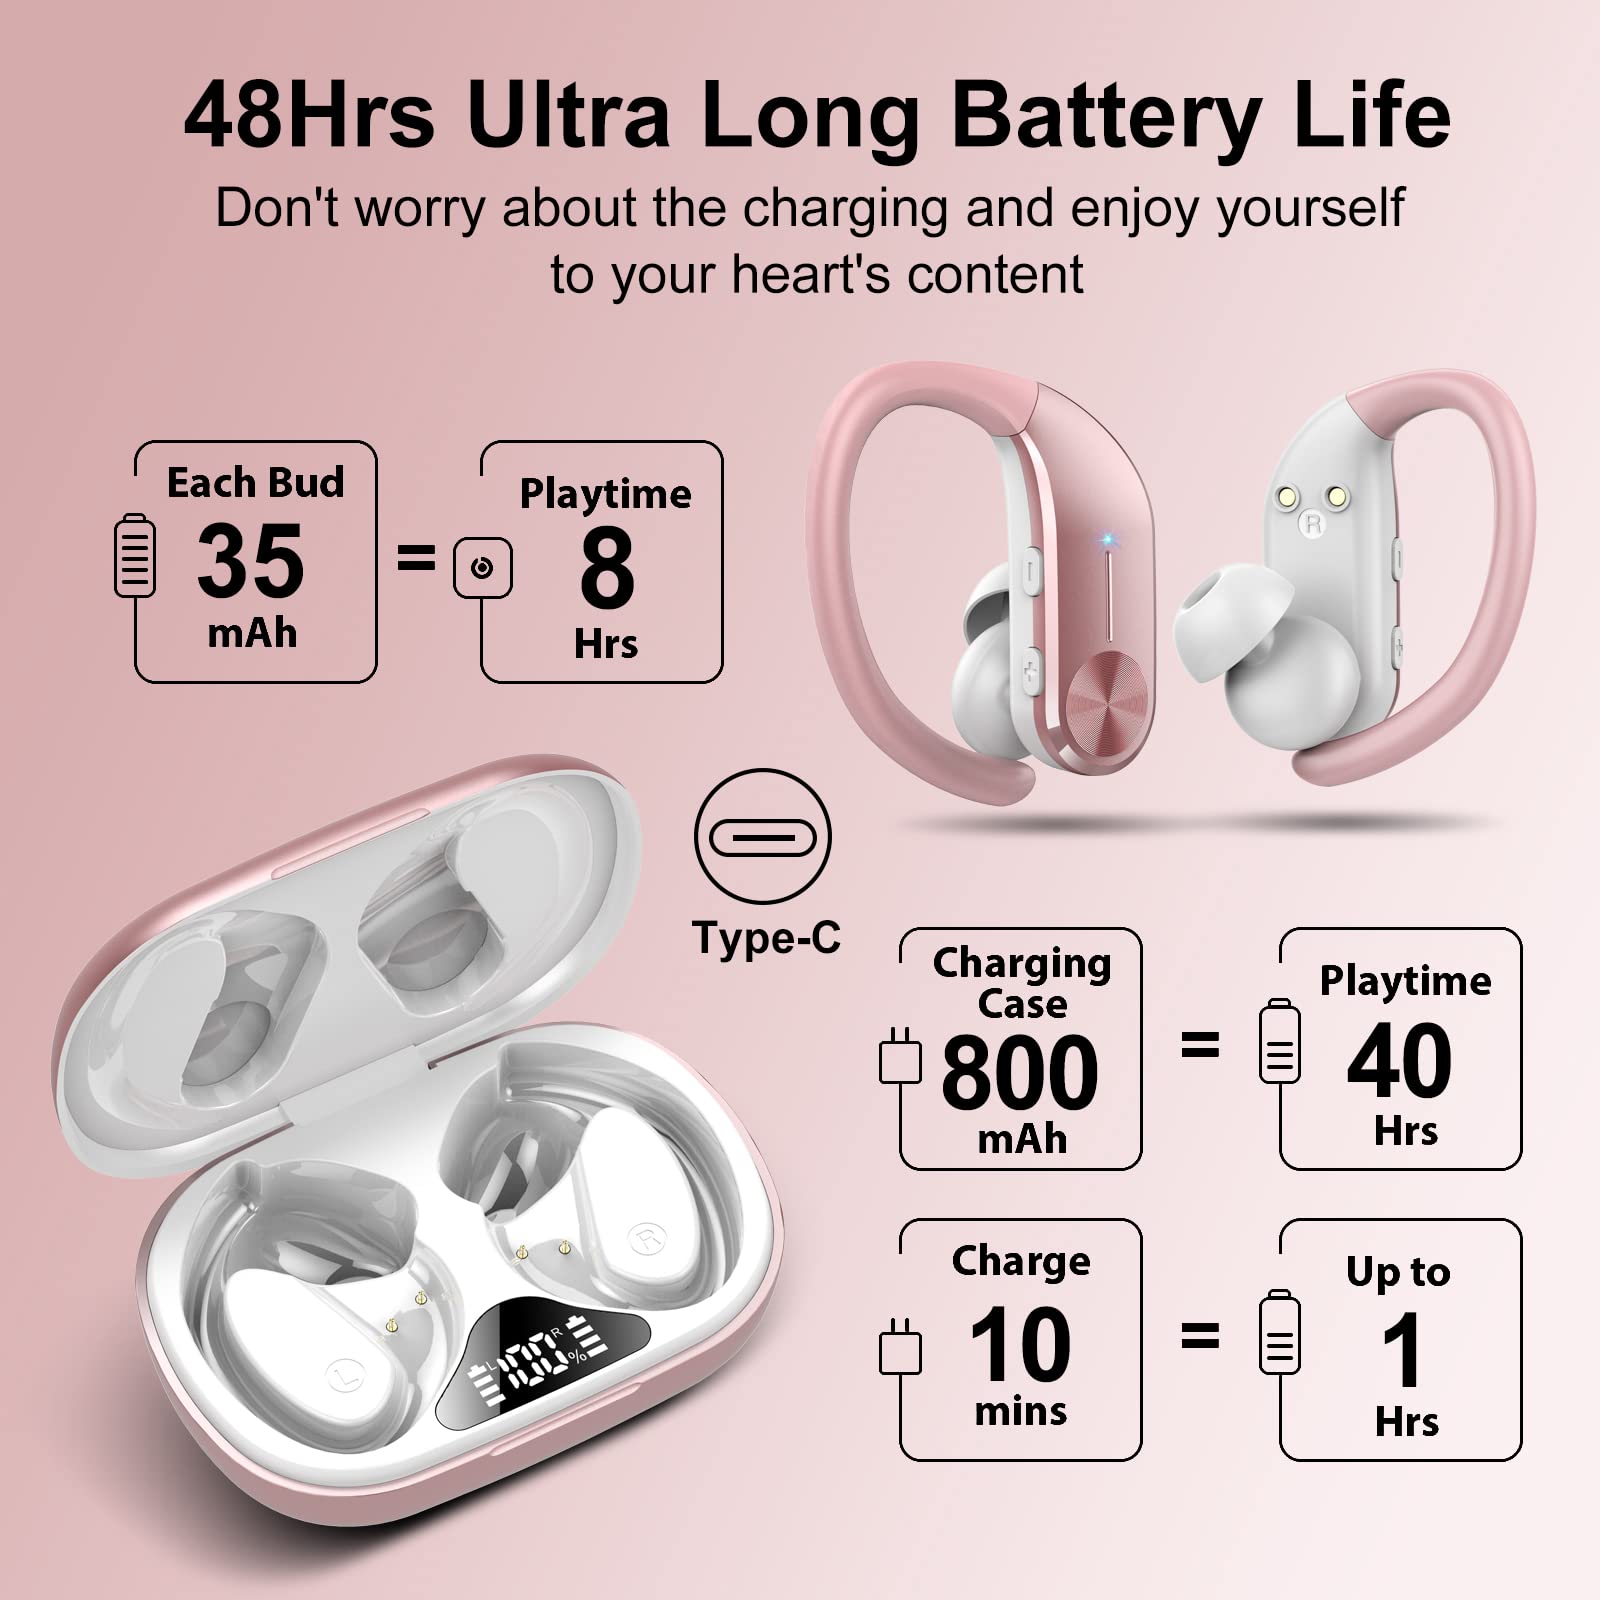 hadbleng Wireless Earbuds Bluetooth 5.3 Headphones 48Hrs Playtime Sports Earhooks Over Ear Earphones with LED Display, IPX7 Waterproof Built-in Mic Headset for Workout, Running, Gym